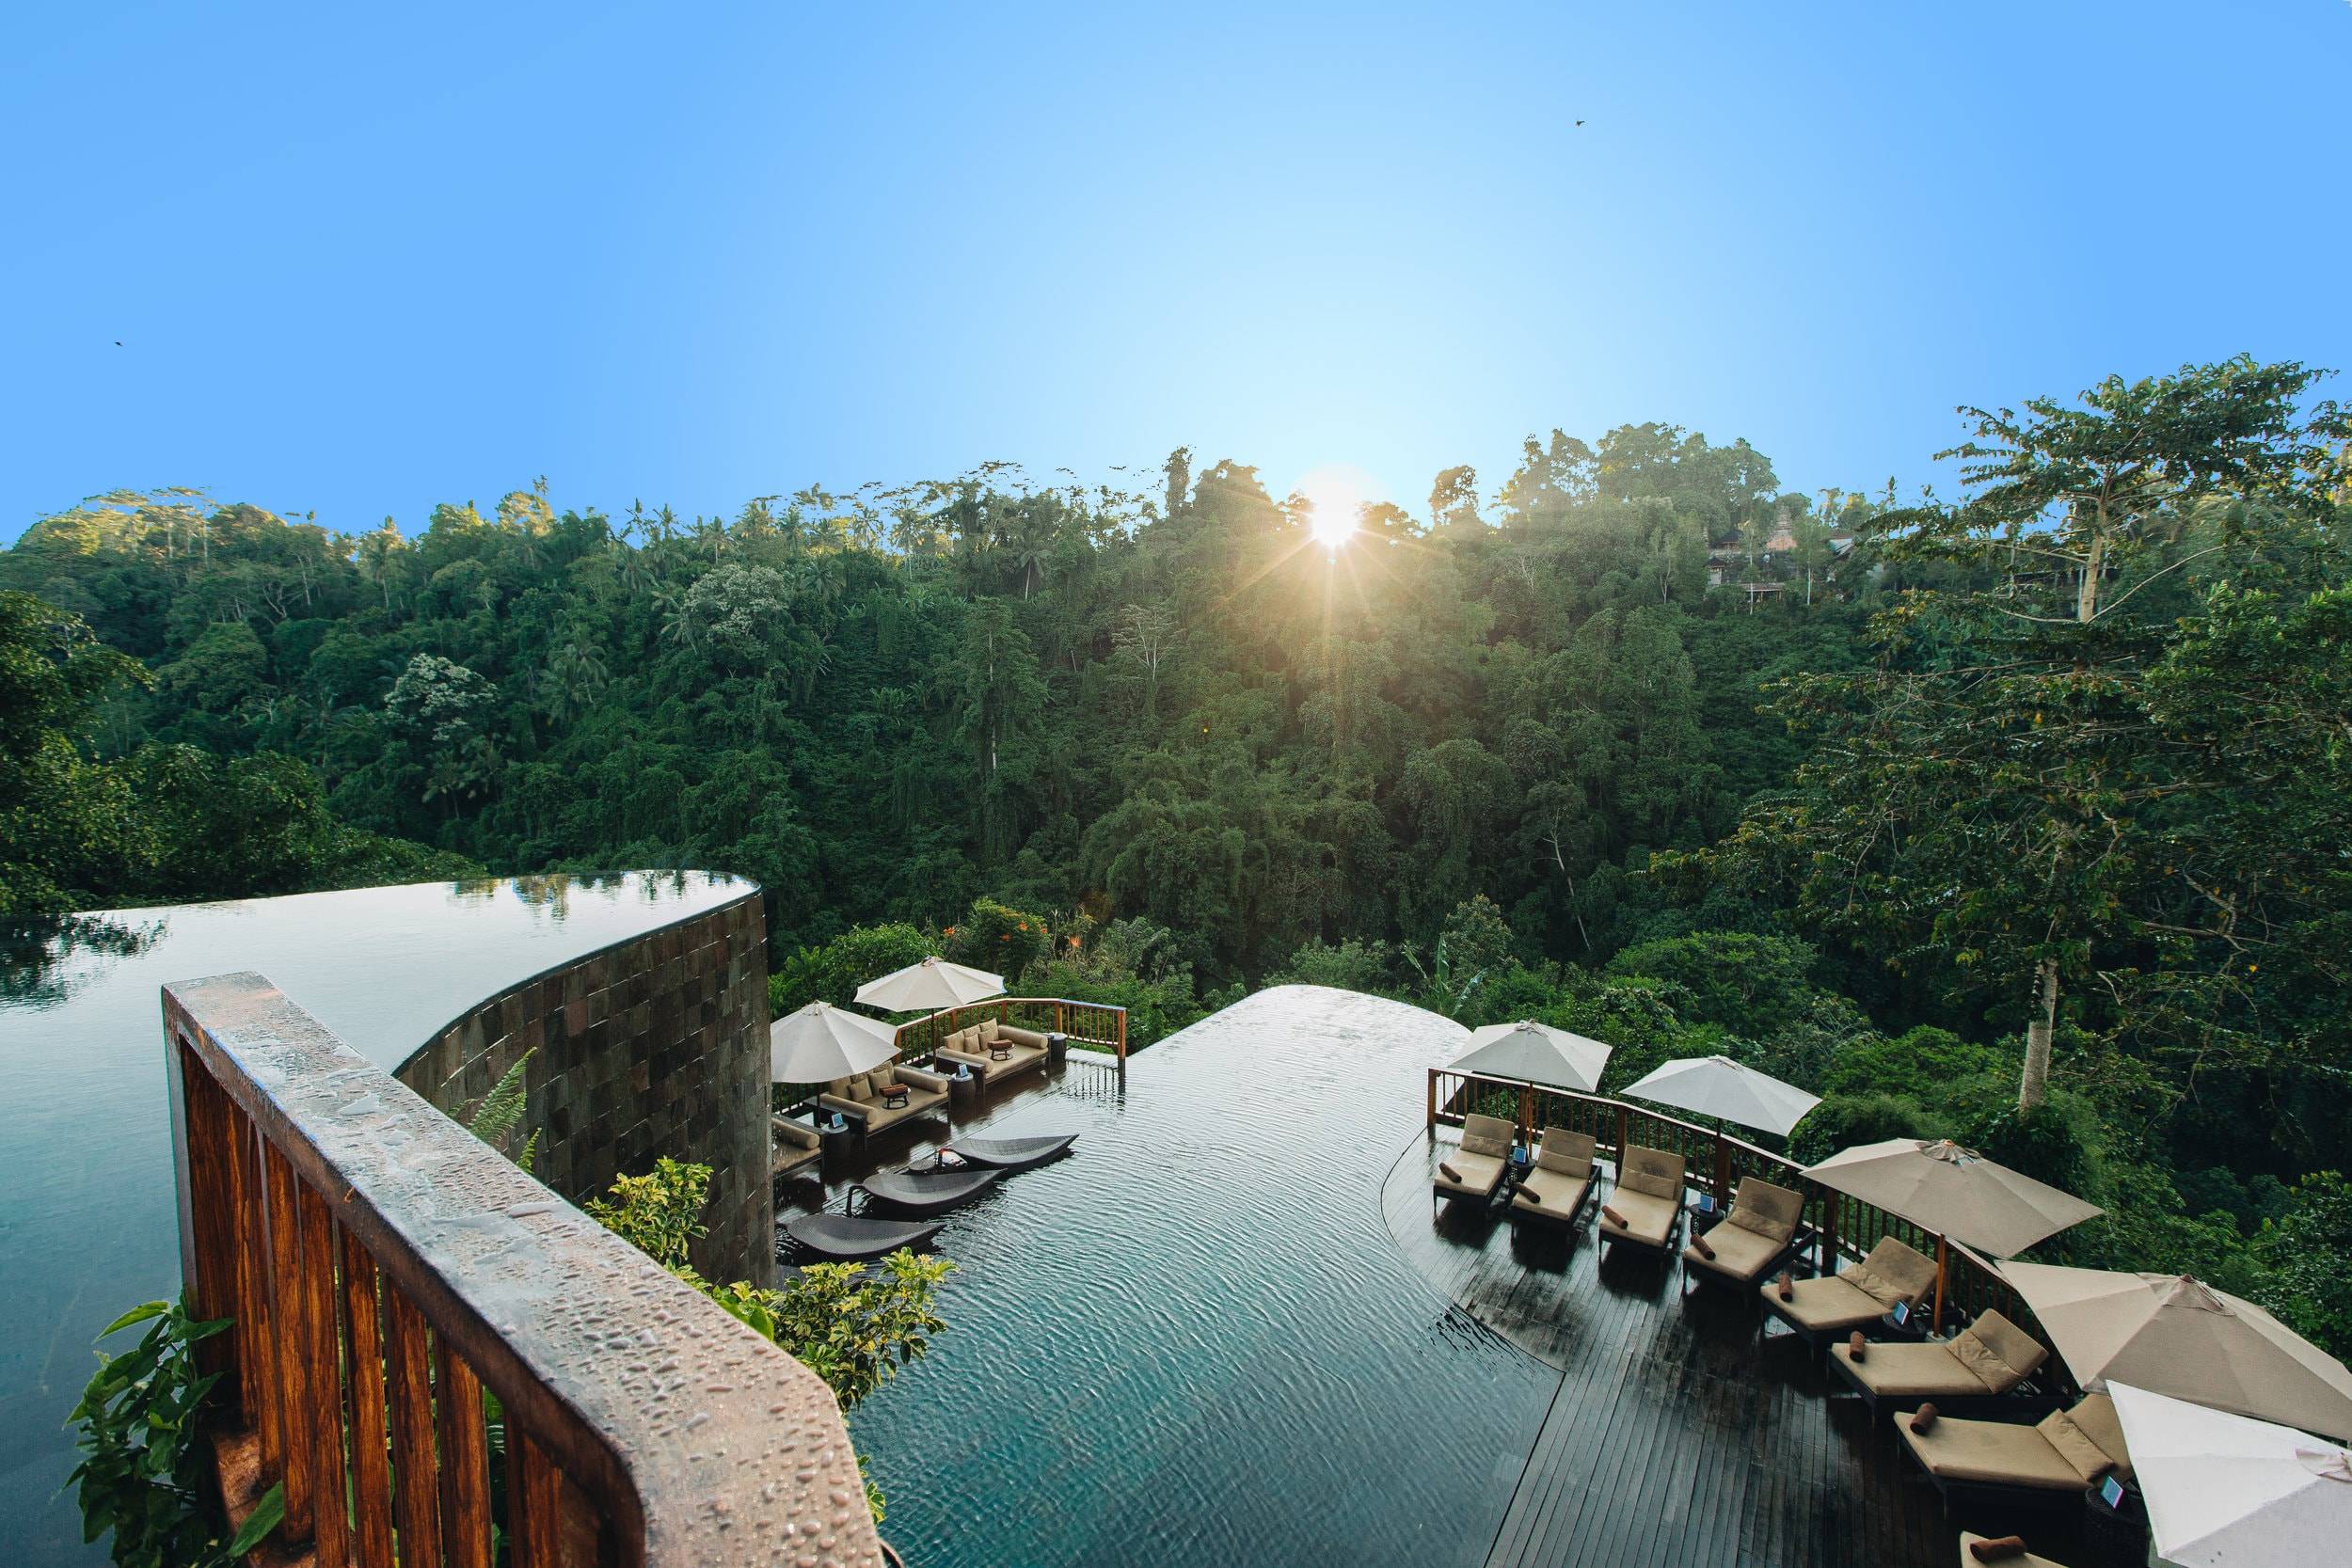 Once in a lifetime opportunity to own Penthouse in Bali, Indonesia. 7 Star rated Hotel Resort.